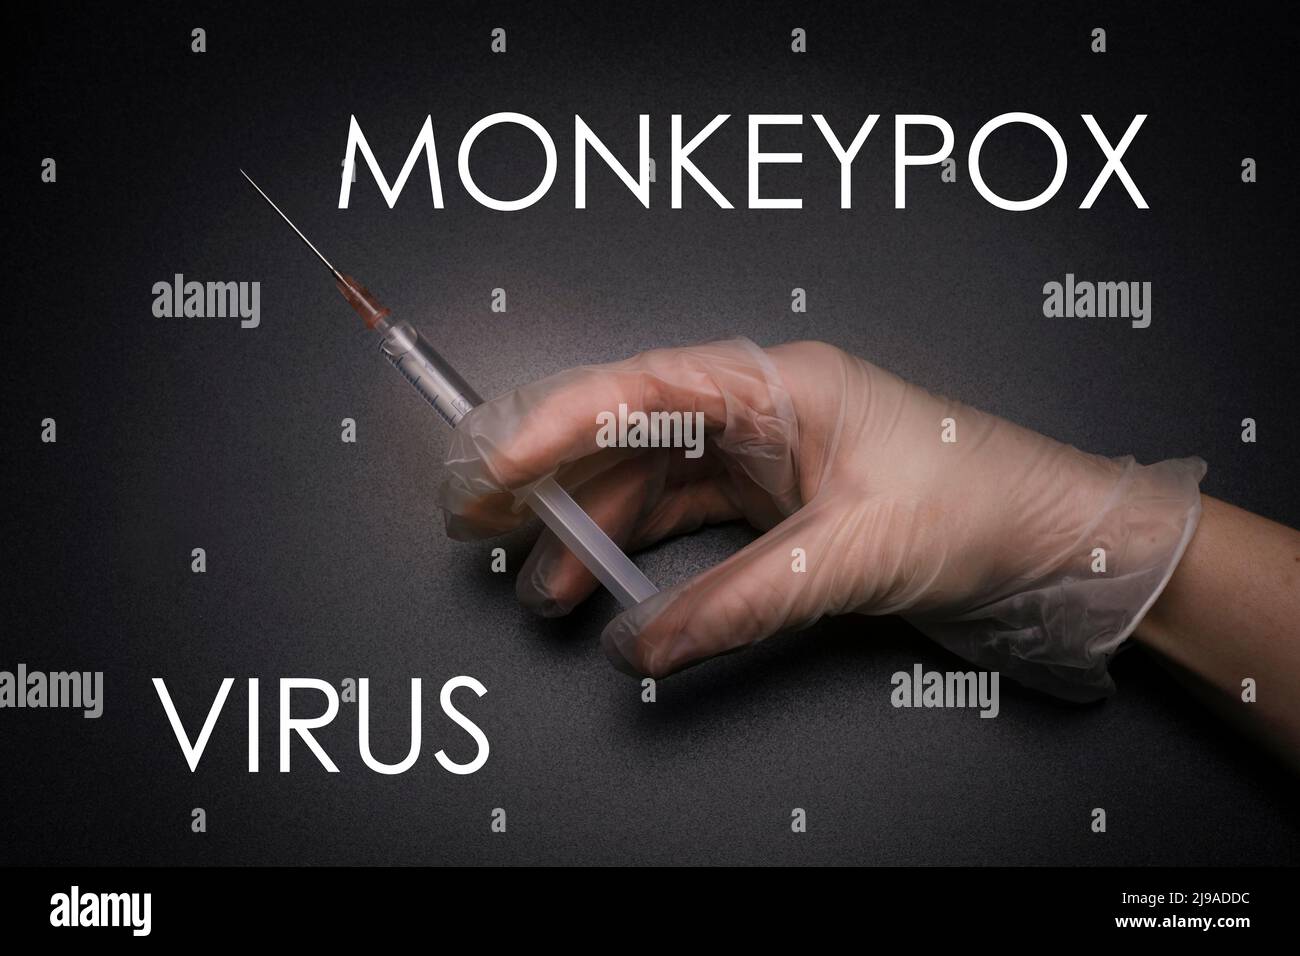 Illustration of monkeypox vaccine. Infectious disease caused by the monkey pox virus. Multi-country outbreak, the new cases. Viral zoonotic disease Stock Photo